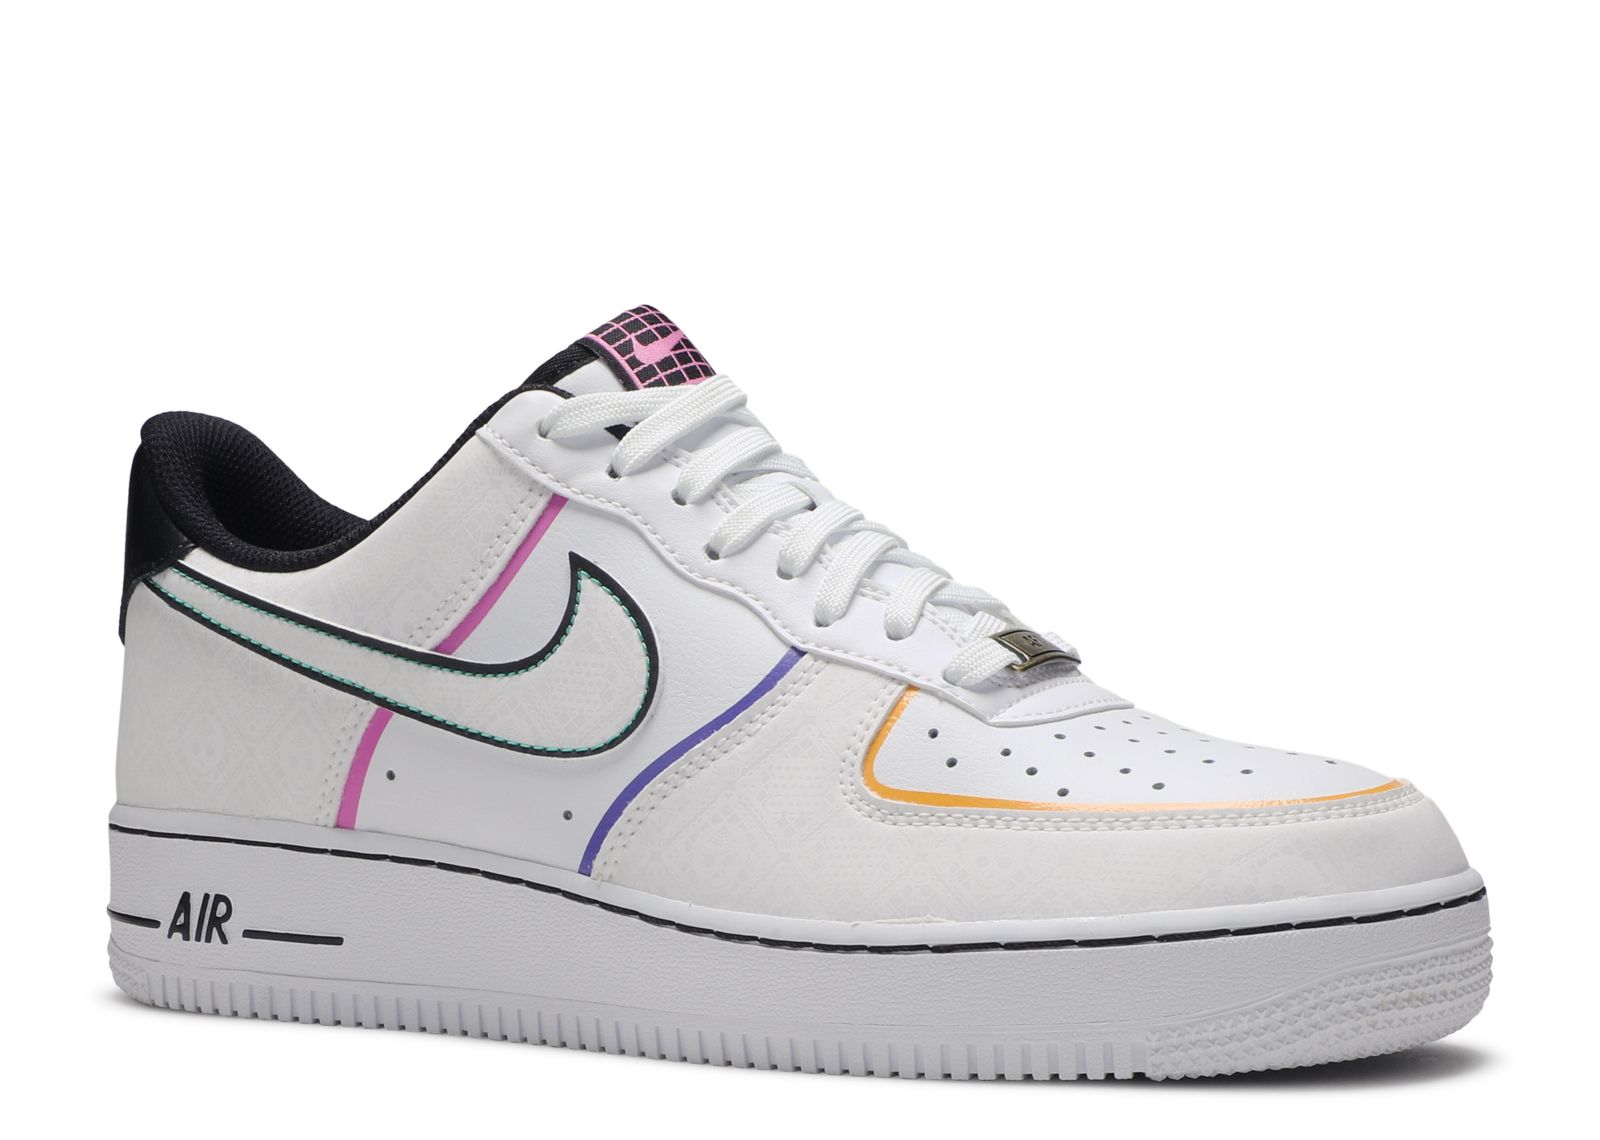 Air Force 1 Low 'Day Of The Dead' - Nike - CT1138 100 -  white/white/black/kinetic green | Flight Club